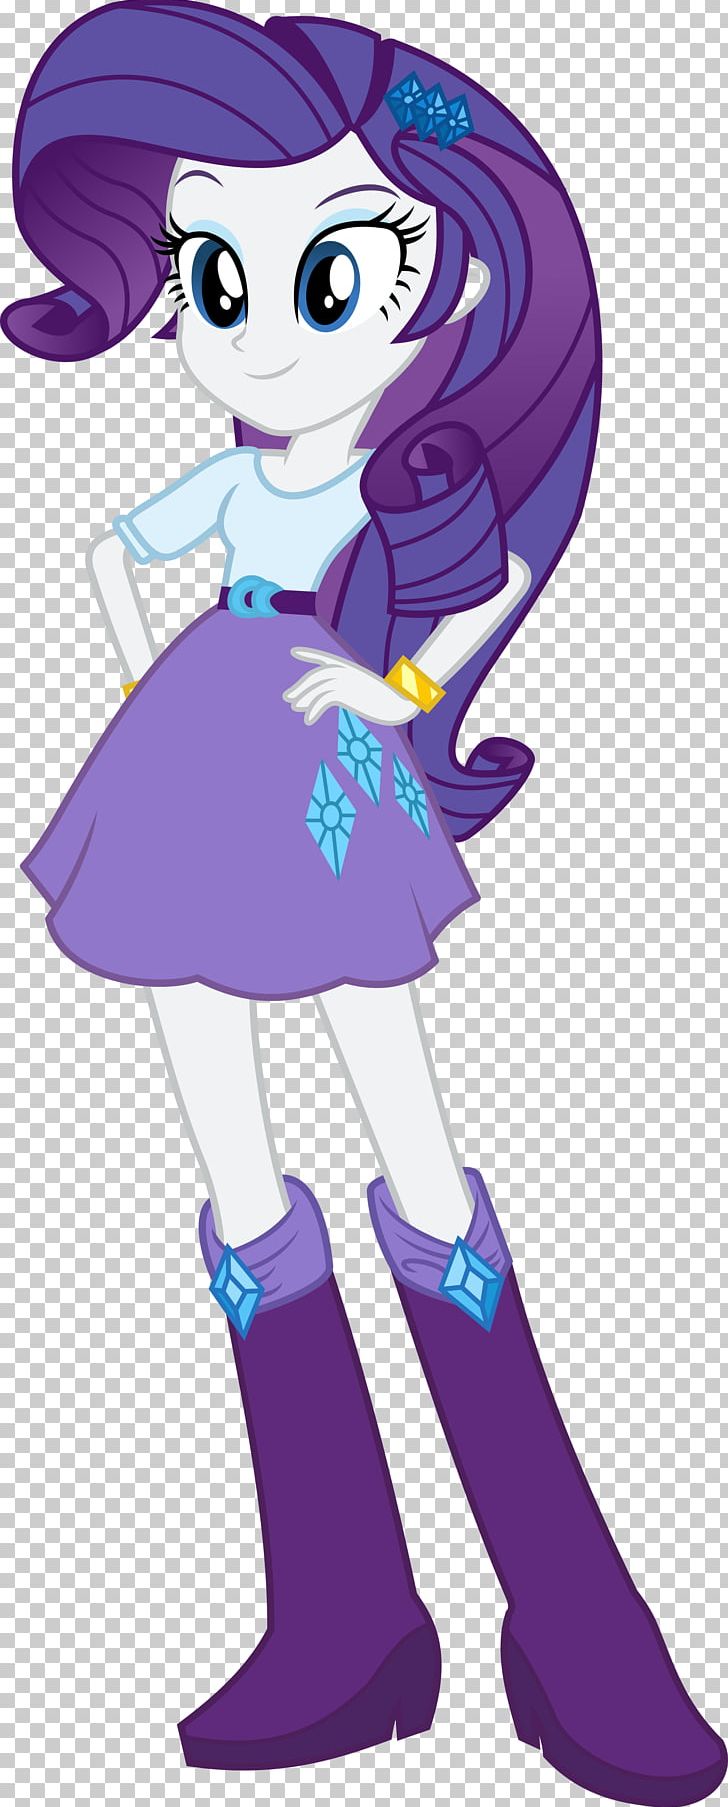 Rarity Applejack Spike My Little Pony: Equestria Girls PNG, Clipart, Cartoon, Equestria, Fictional Character, Human, Magical Sparcals Free PNG Download